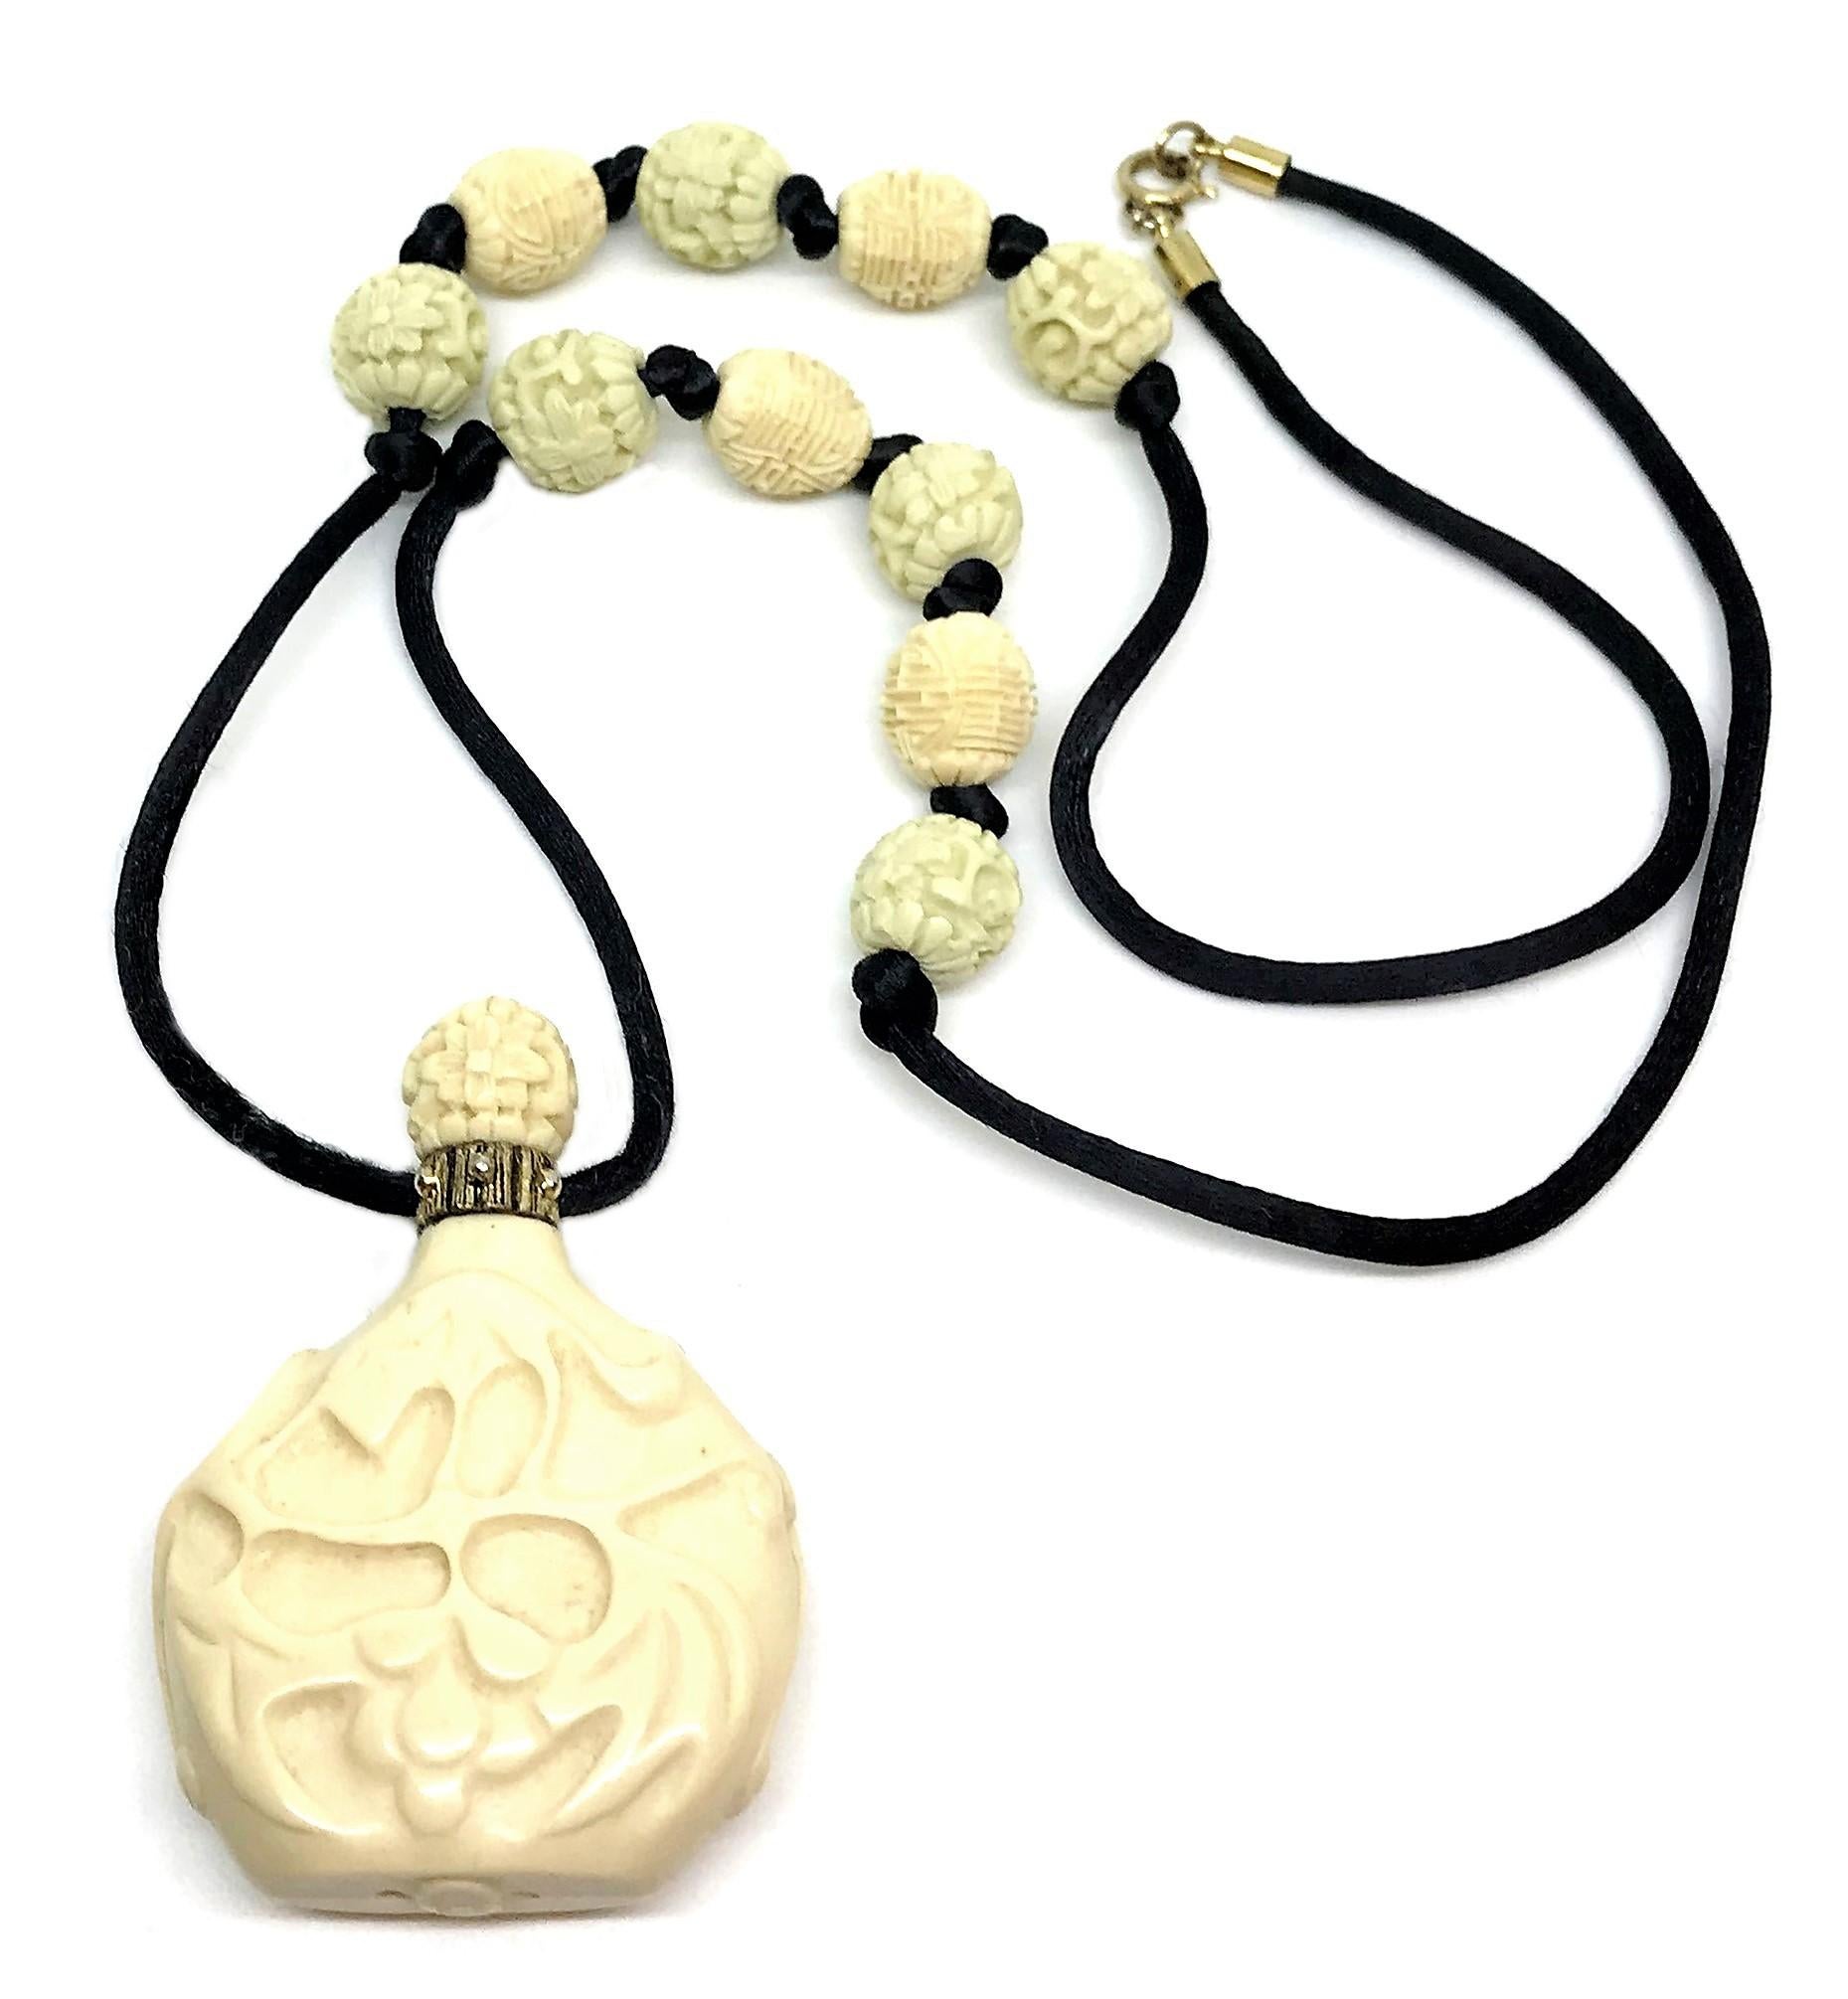 Circa 1960s Hattie Carnegie black cord necklace with a molded faux-snuff bottle pendant and embellished with molded Asian character and floral beads in pale green and ivory colors.  The necklace measures 26